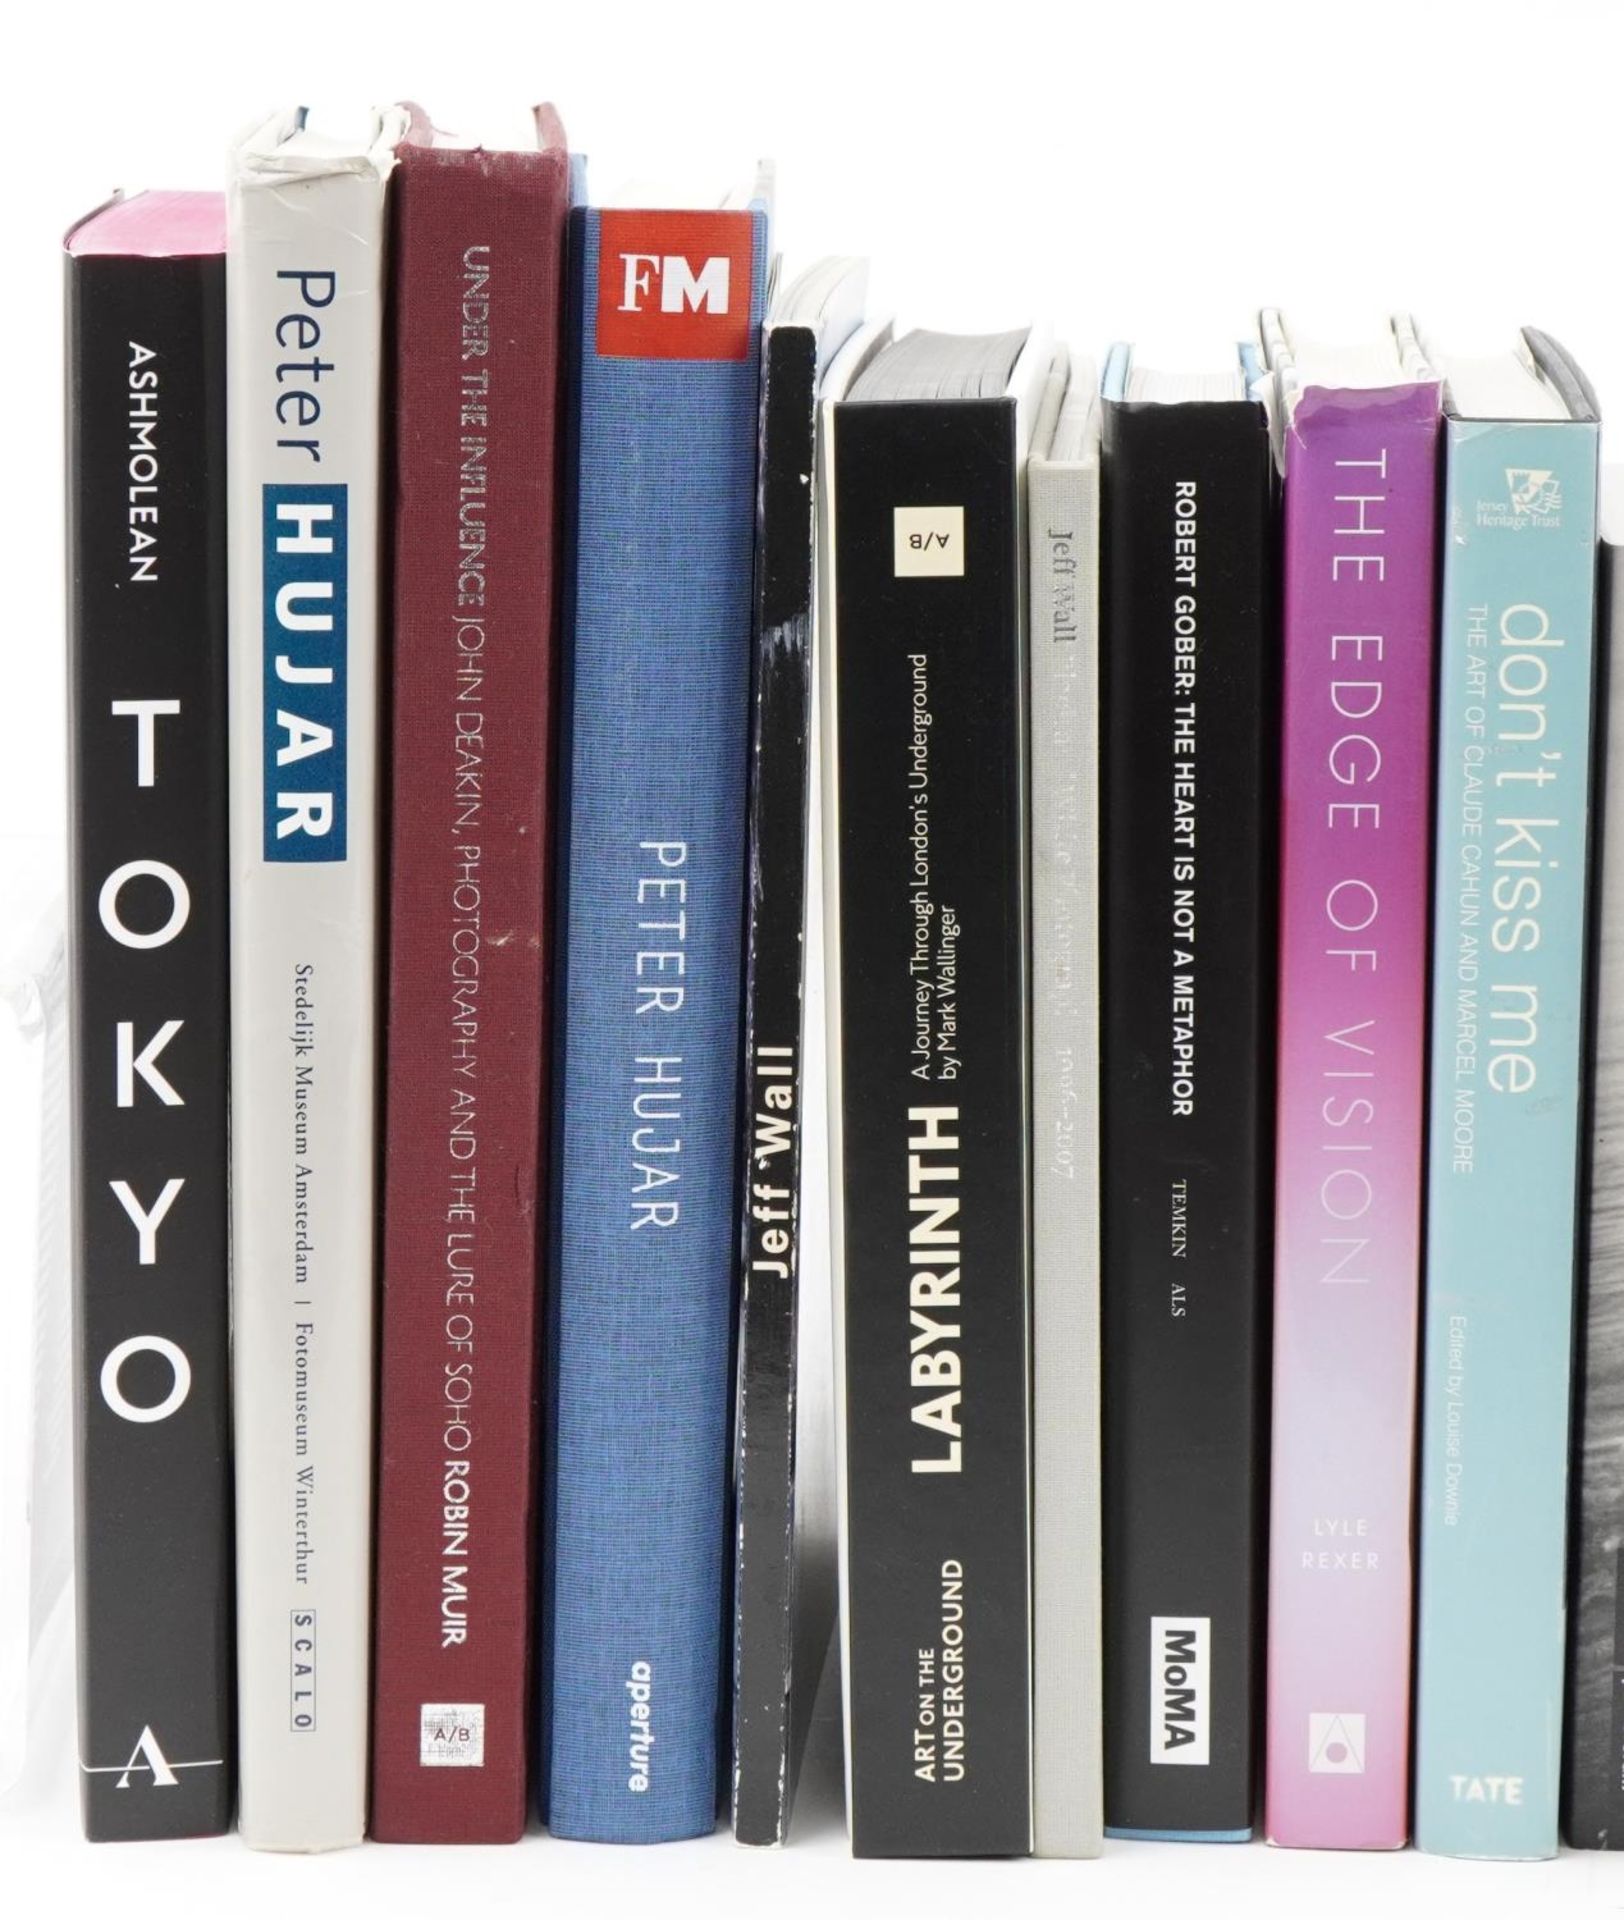 Collection of photography and related books including Frida Kahlo, Her Photos, Araki Tokyo Lucky - Image 2 of 3